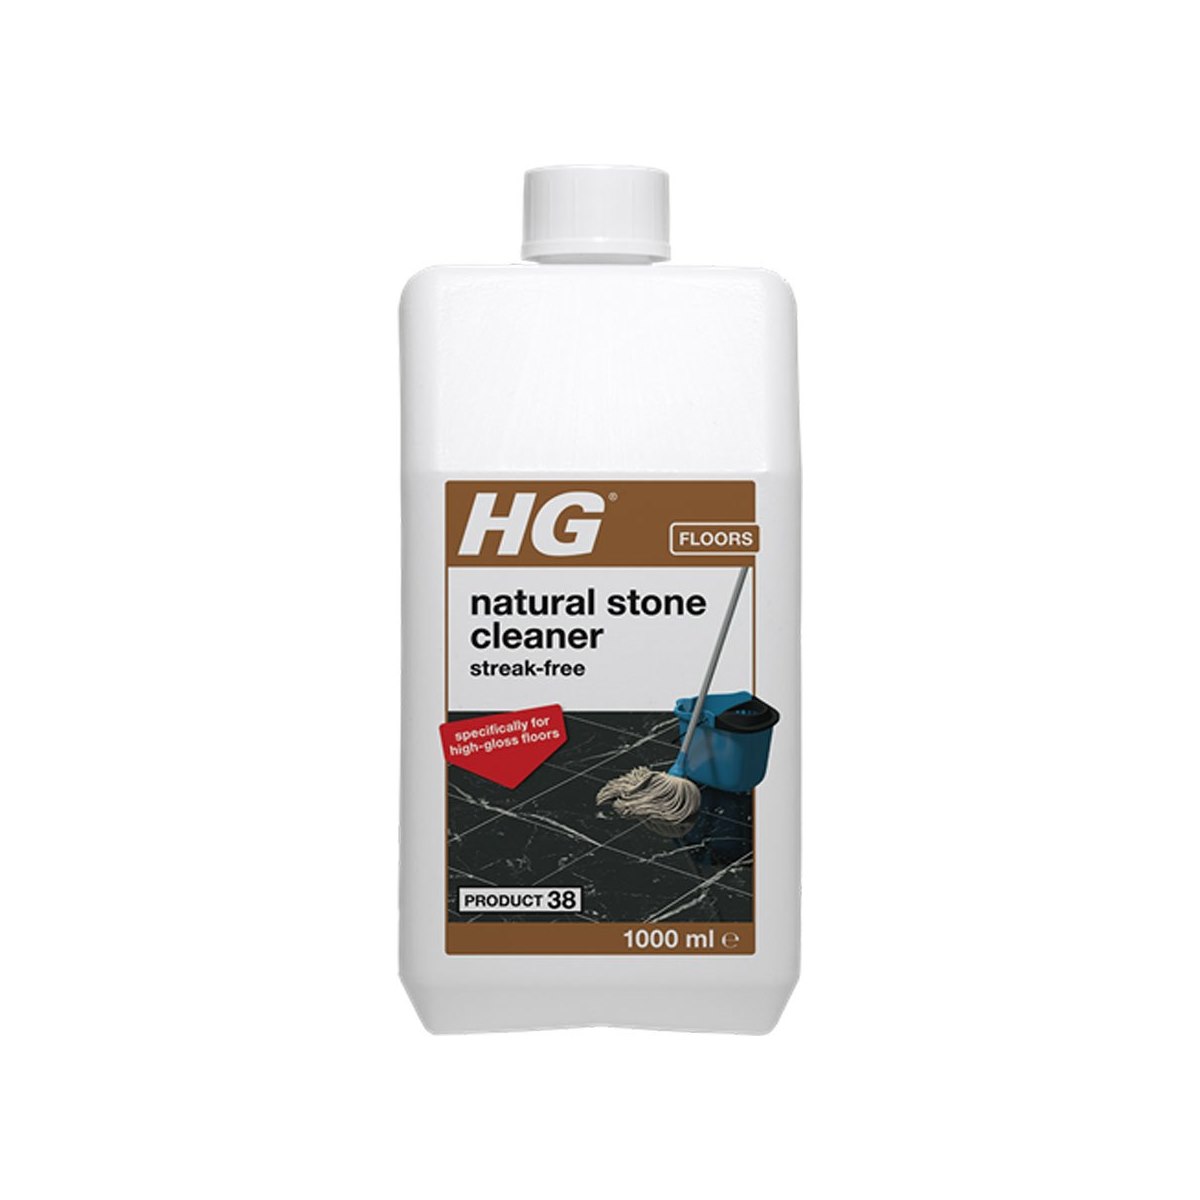 HG Natural Stone Cleaner Streak Free 1 Litre (Product 38)